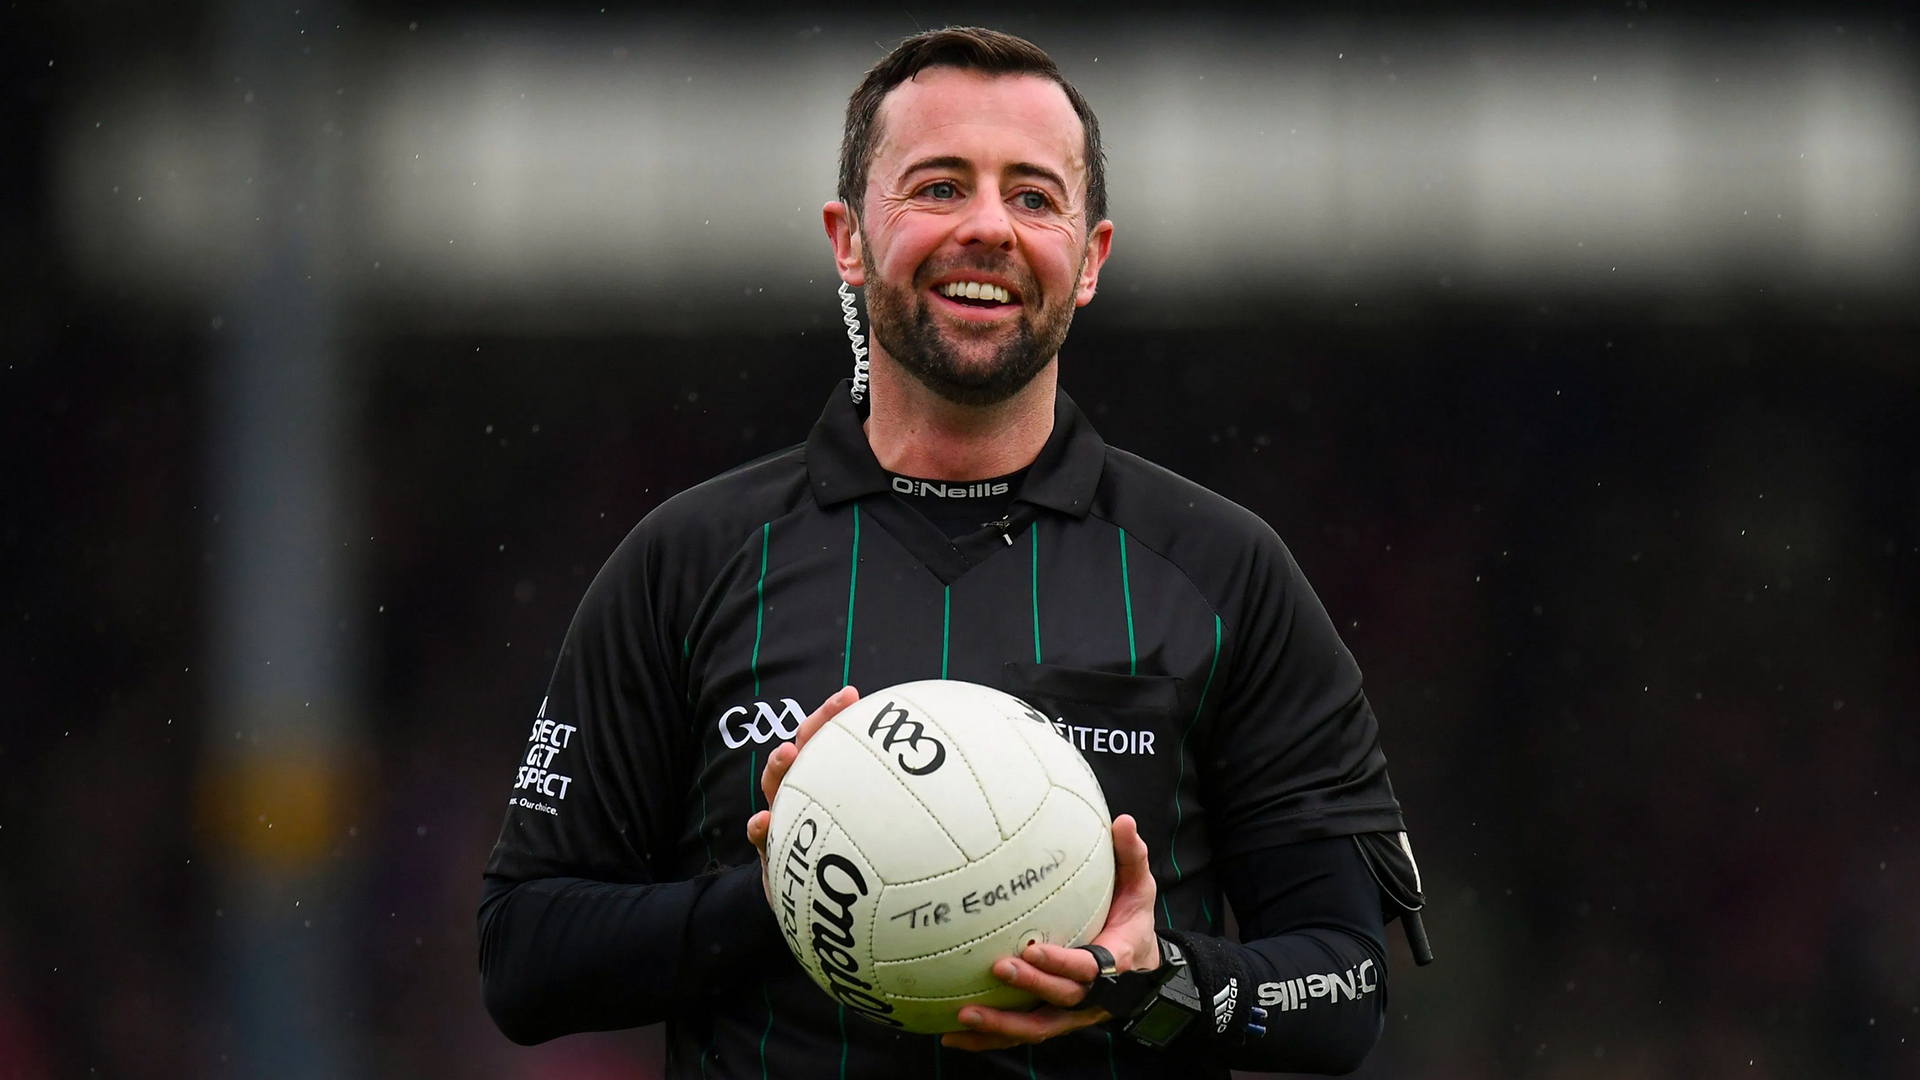 David Gough stands smiling in his referee uniform holding a GAA ball